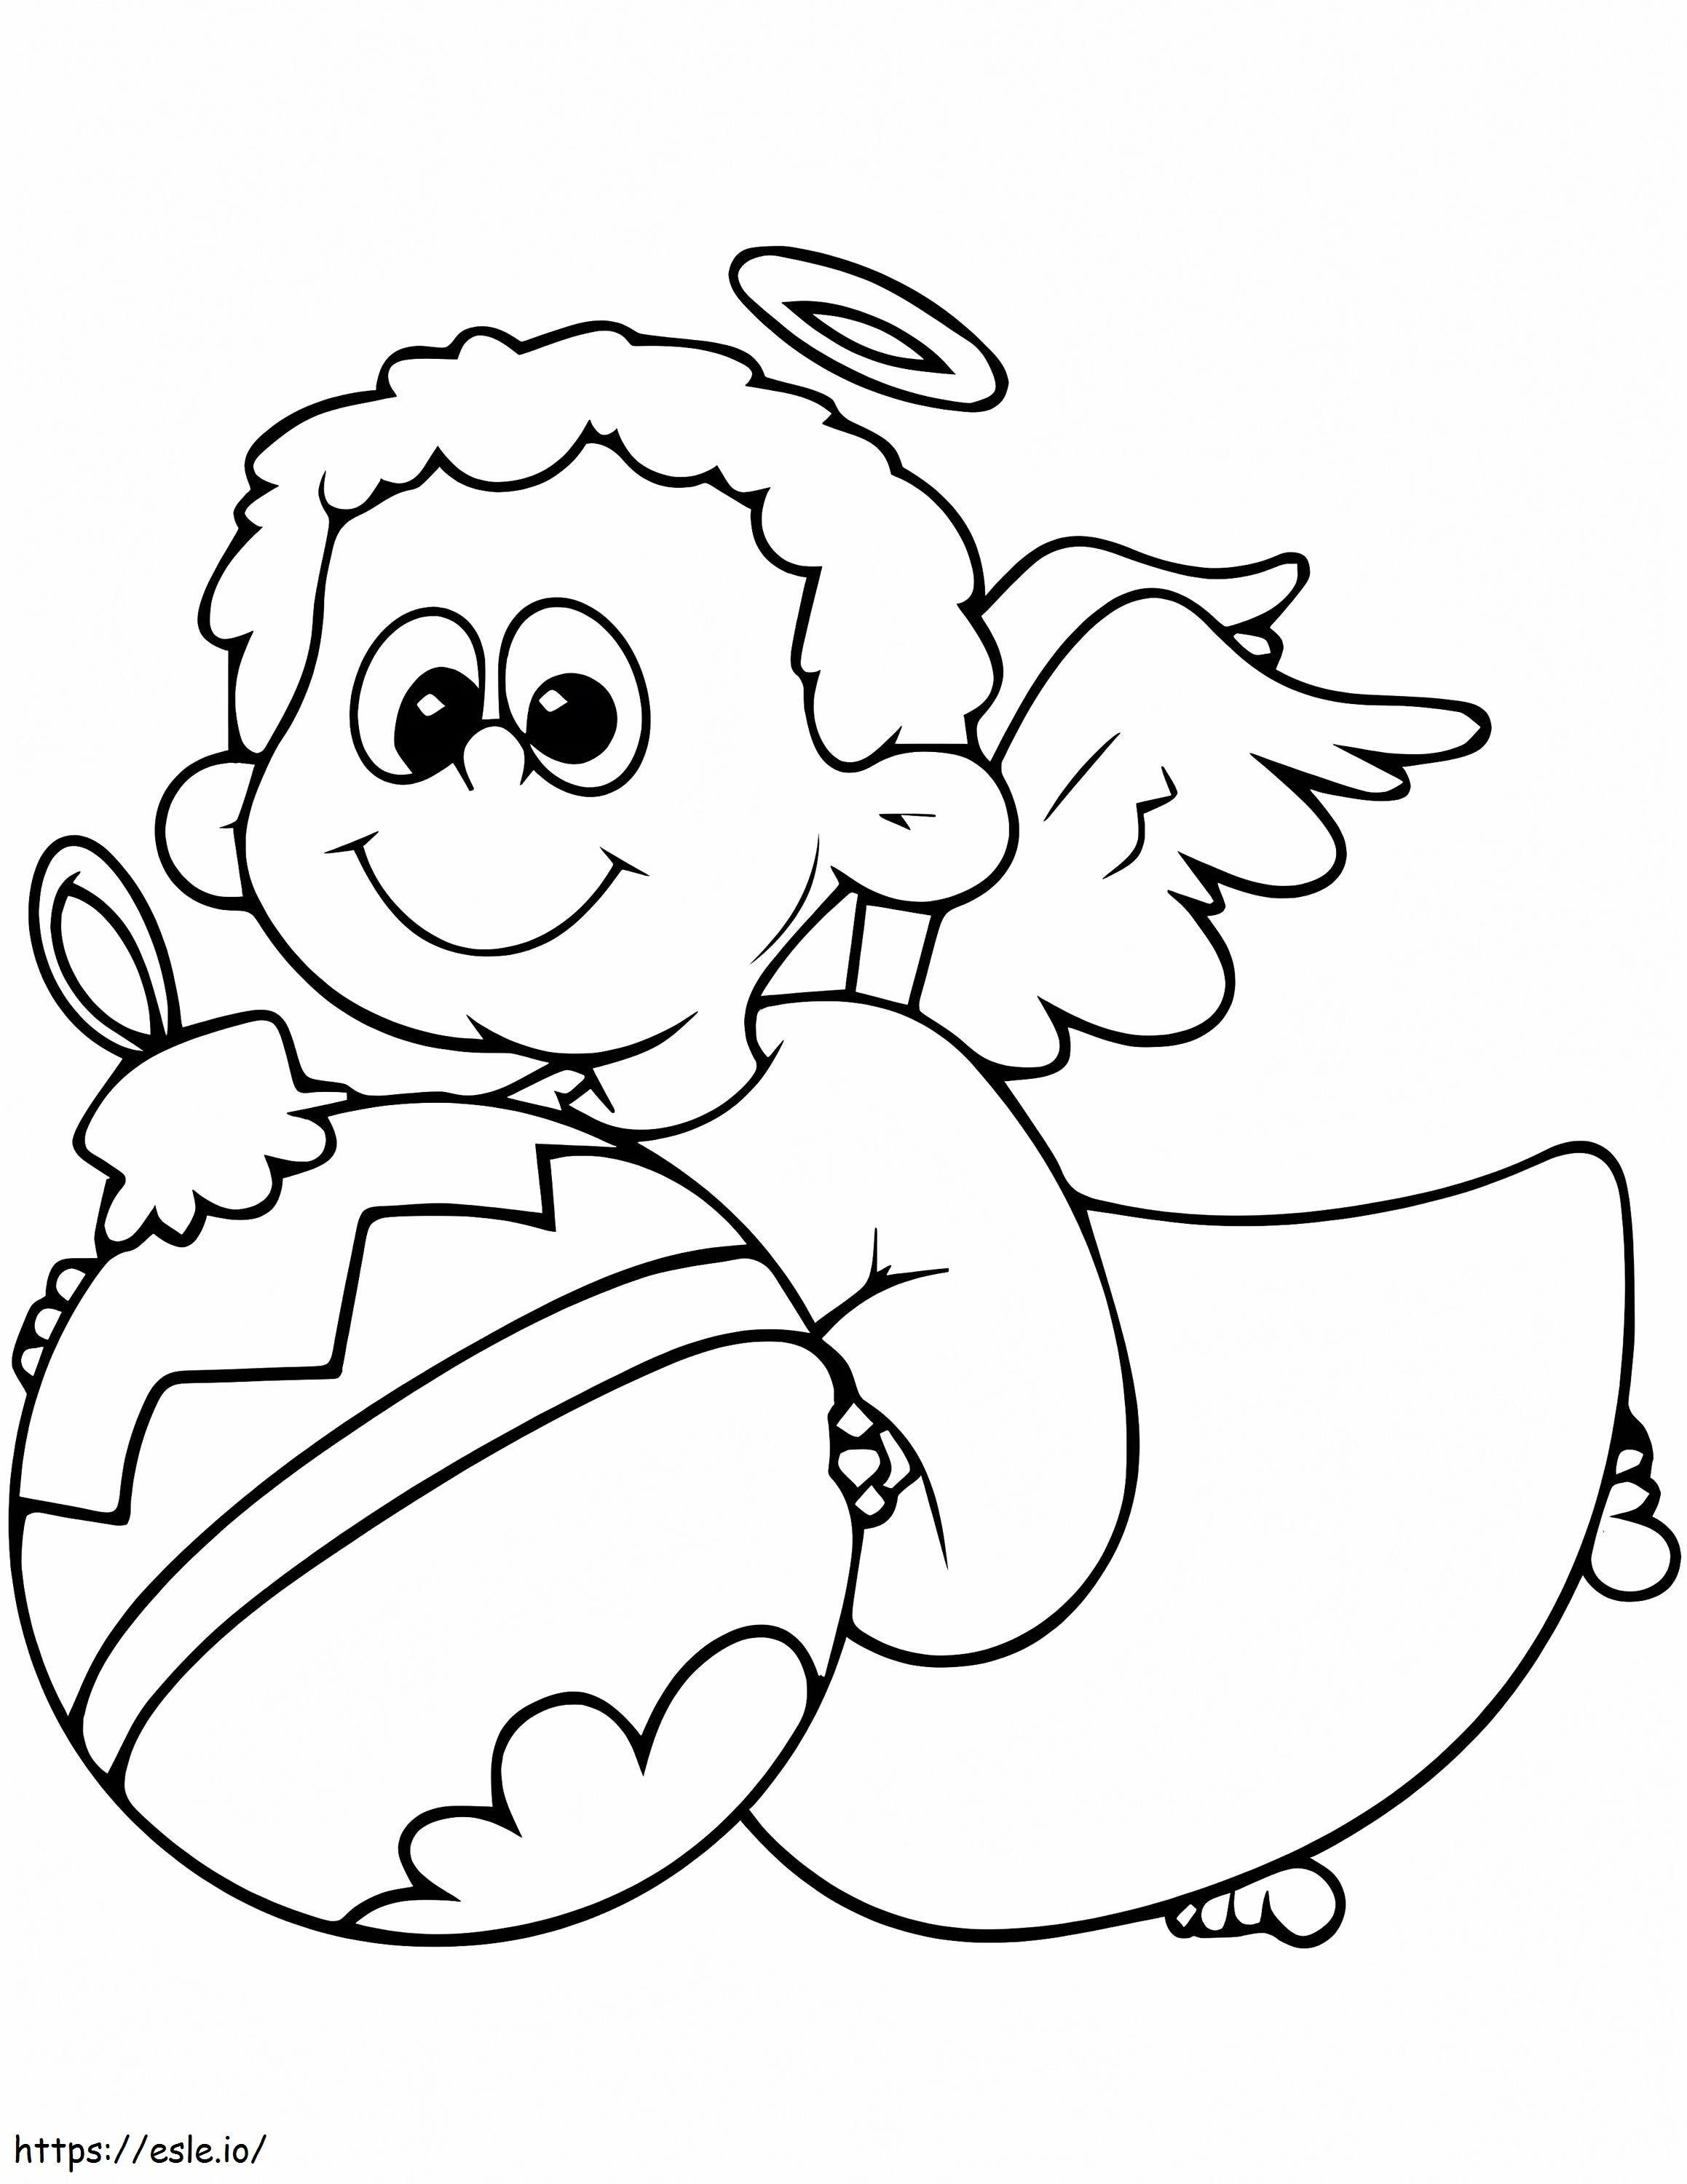 Angel With A Christmas Ball coloring page